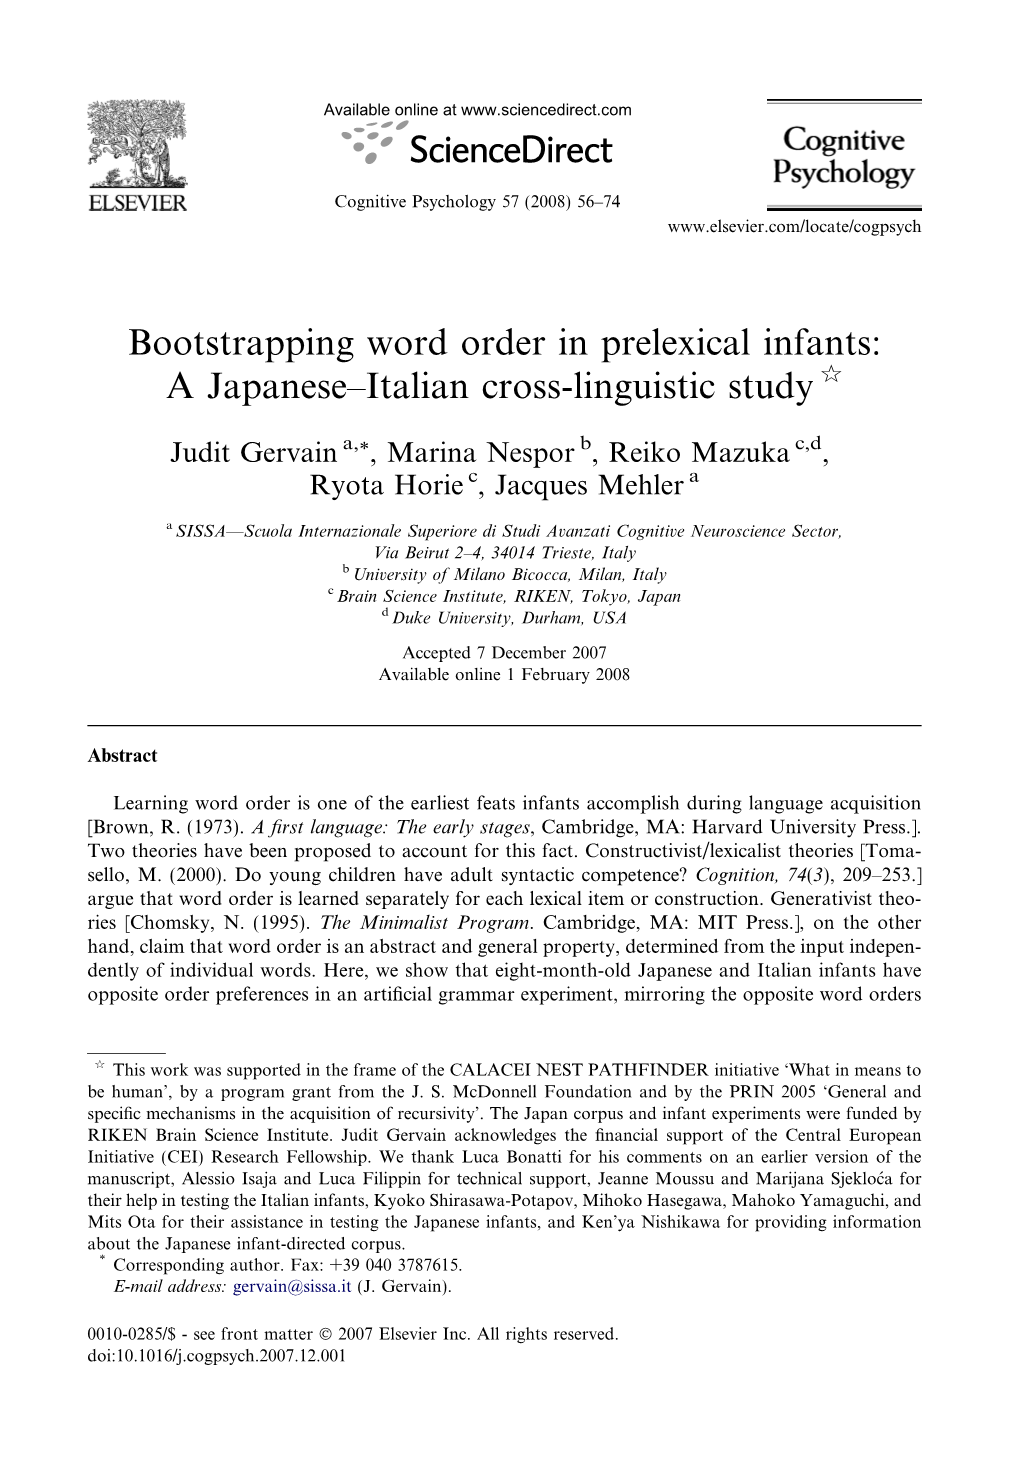 Bootstrapping Word Order in Prelexical Infants: a Japanese–Italian Cross-Linguistic Study Q